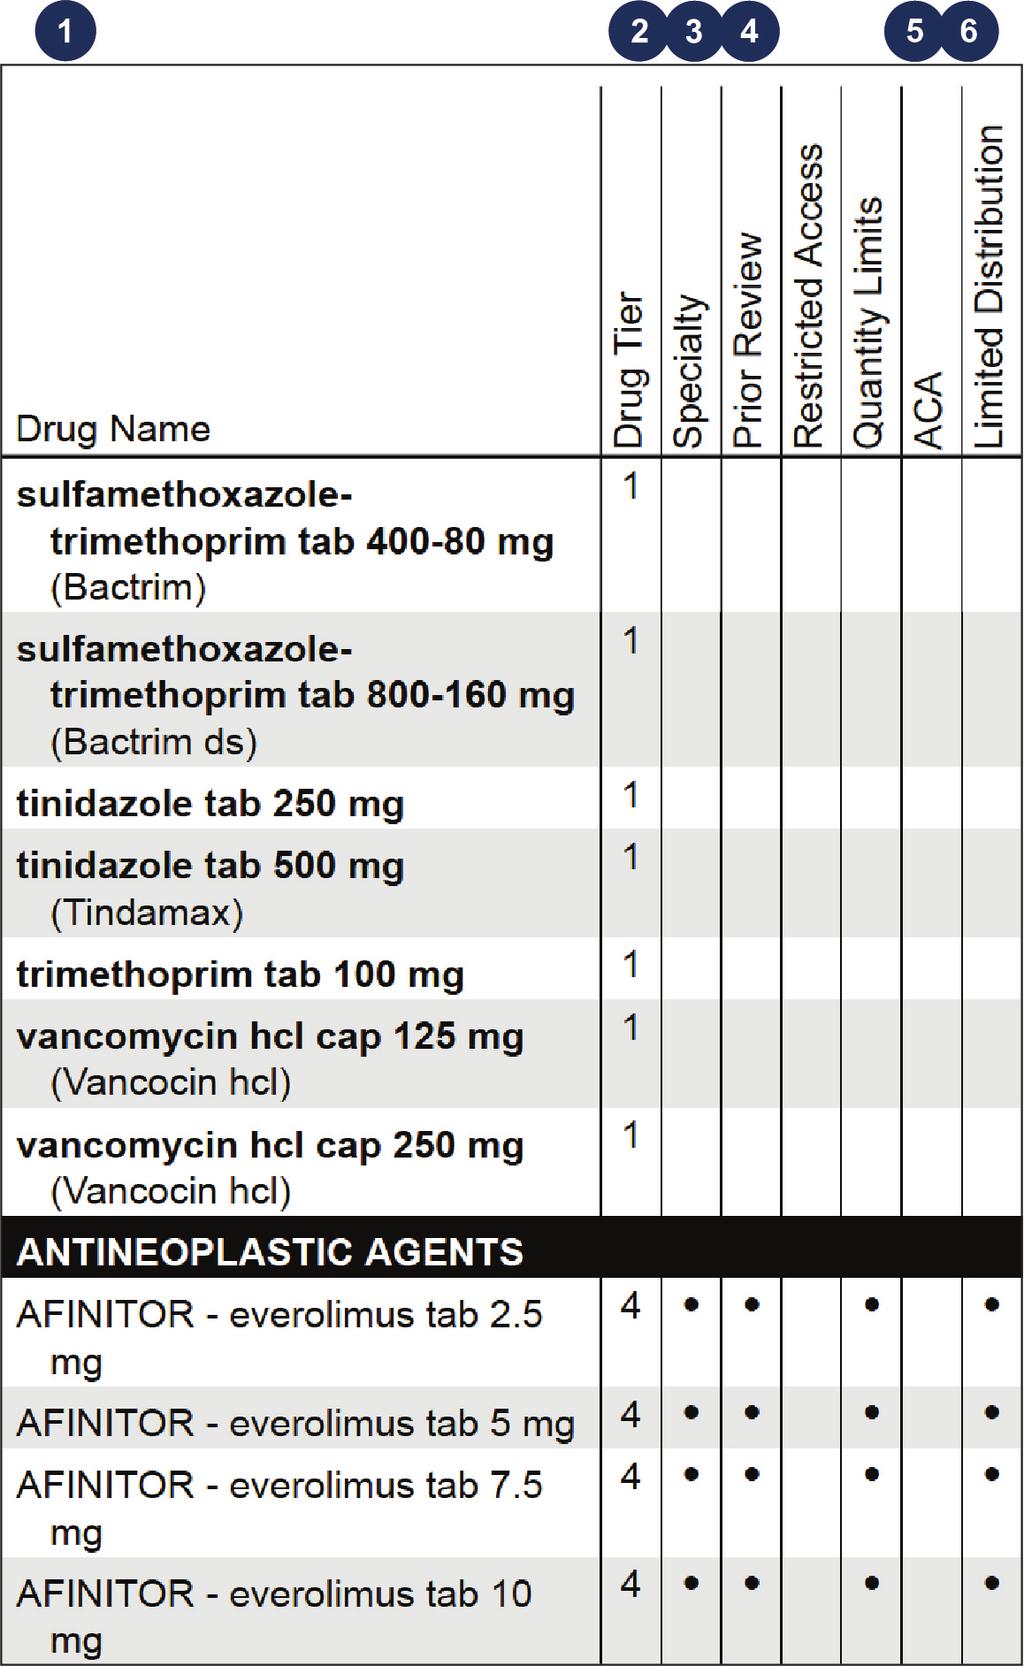 Using the member guide to the Enhanced Formulary The Medication List is organized into broad categories (e.g., ANTI-INFECTIVE AGENTS).